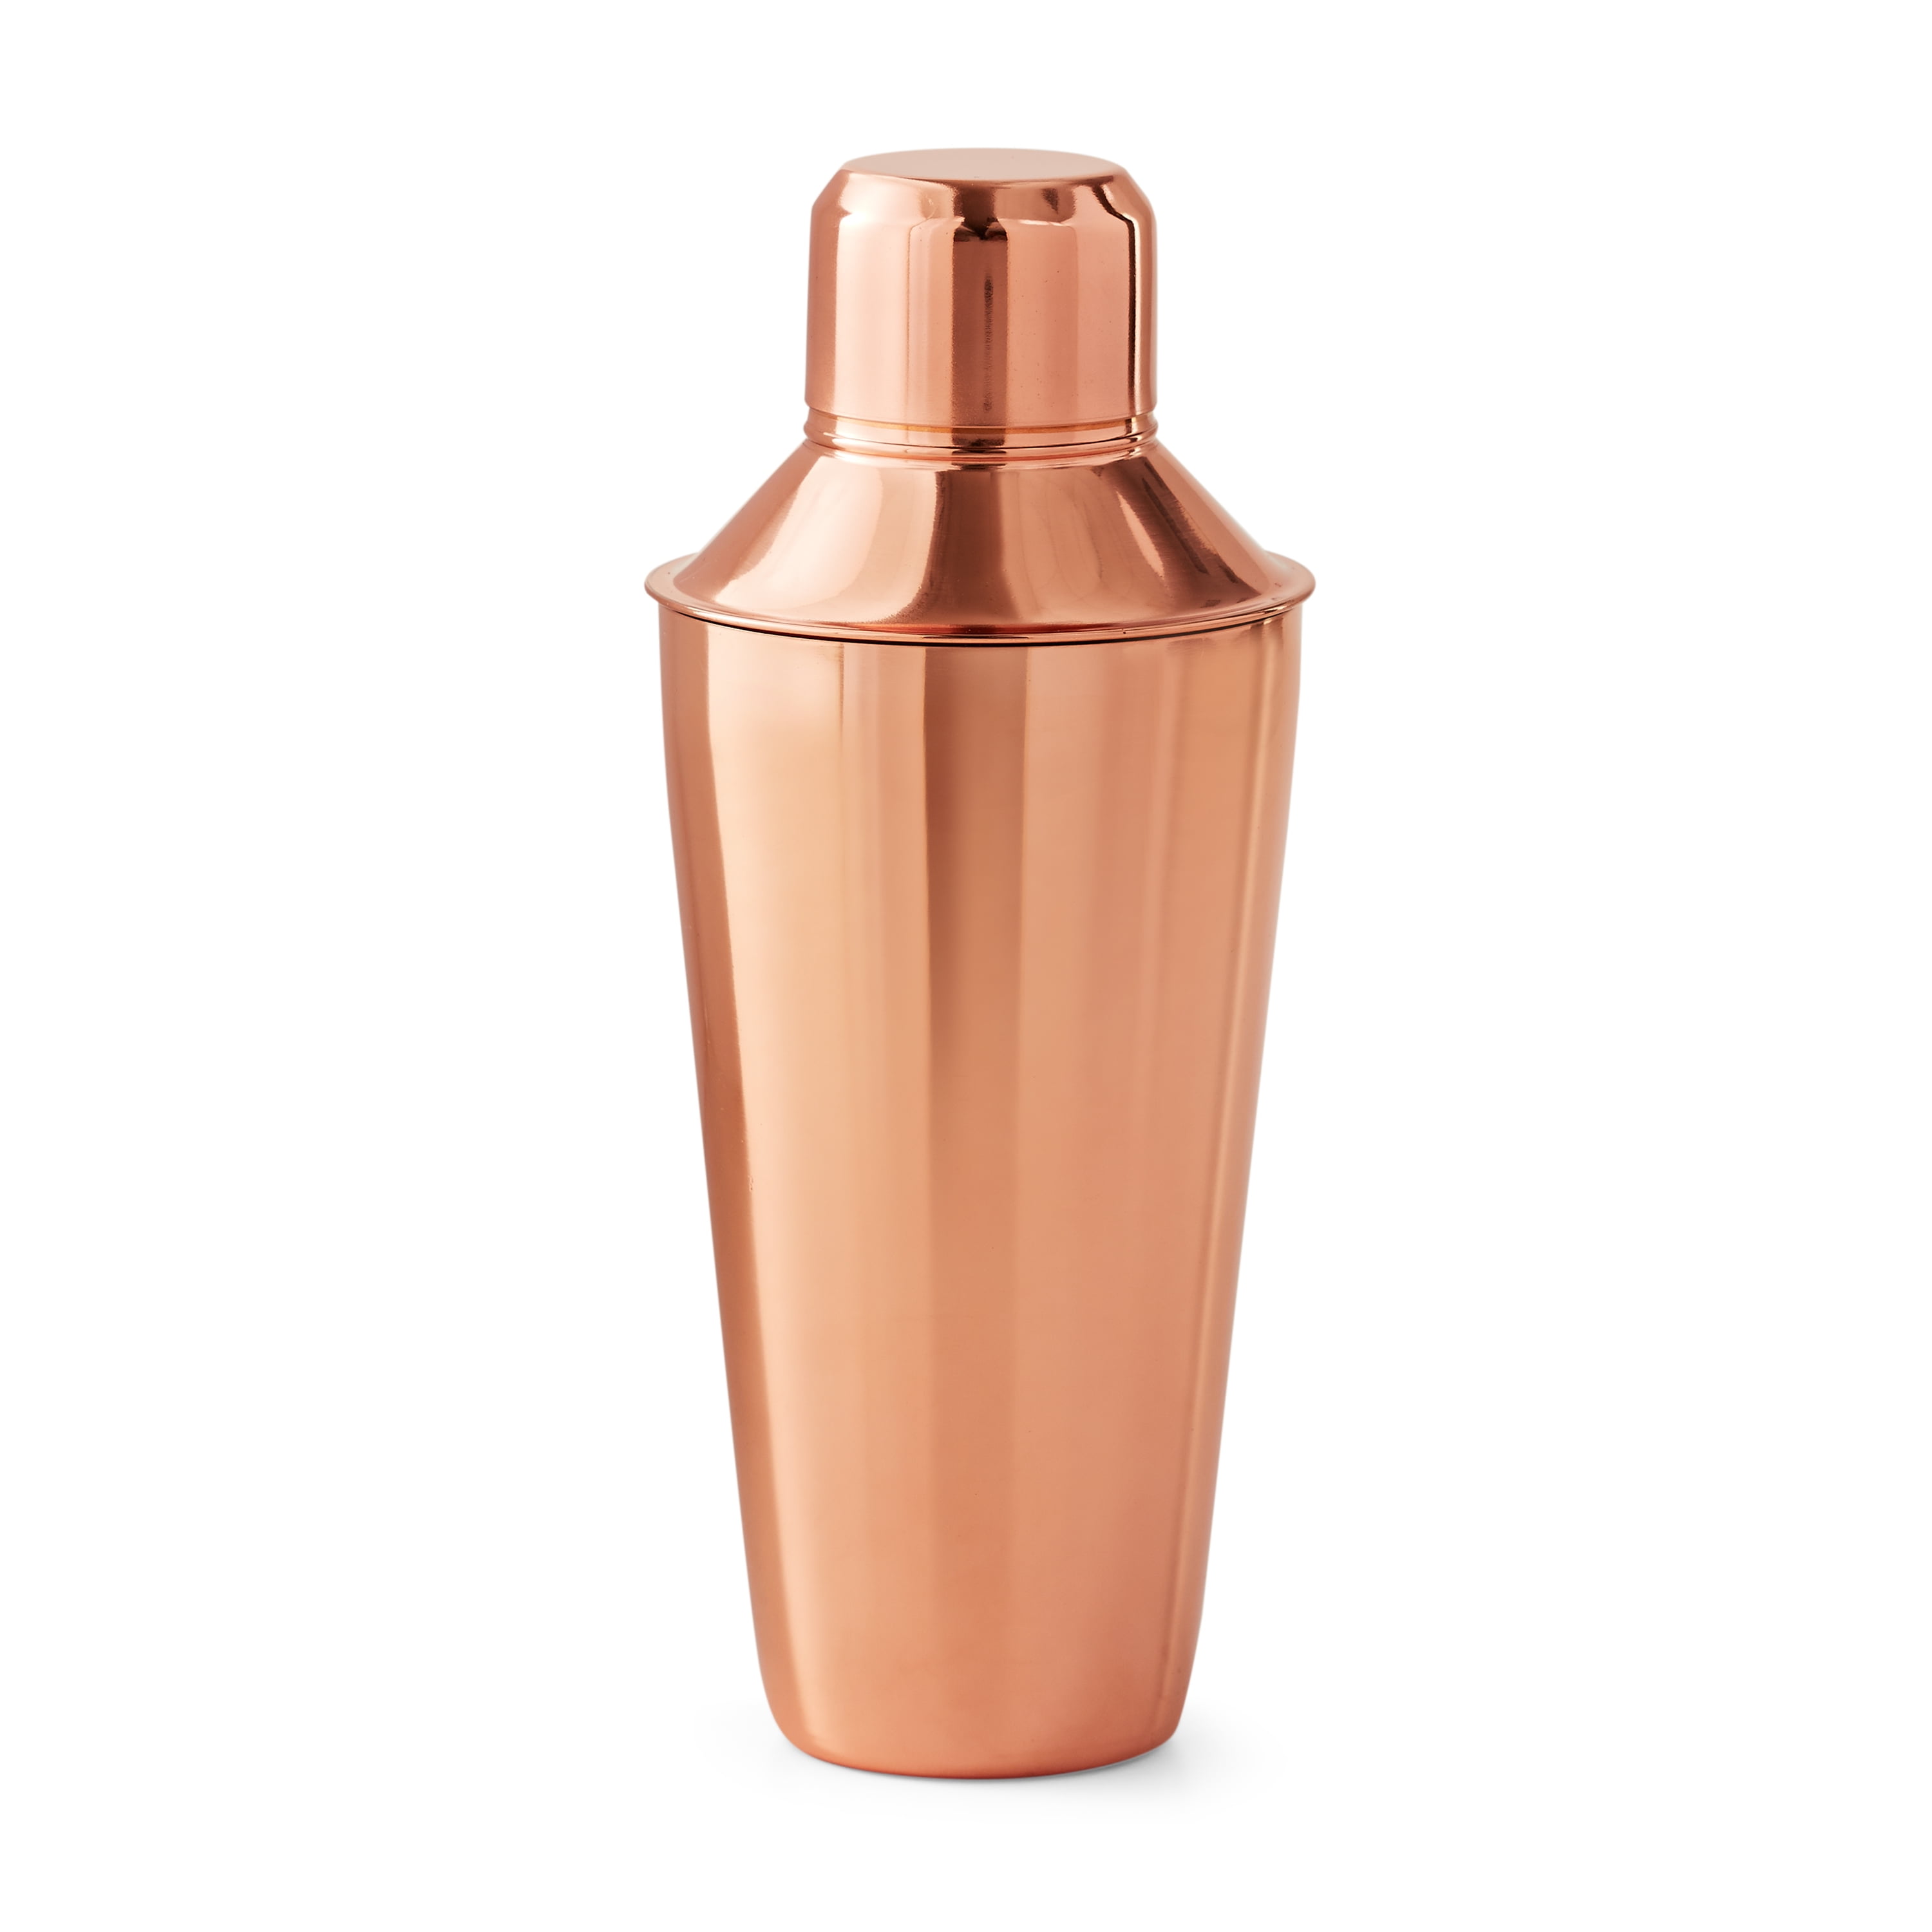 Creative Co-op Mid-Century Stainless Steel 2-Tone Resin Lid, Gold Finish Cocktail Shaker